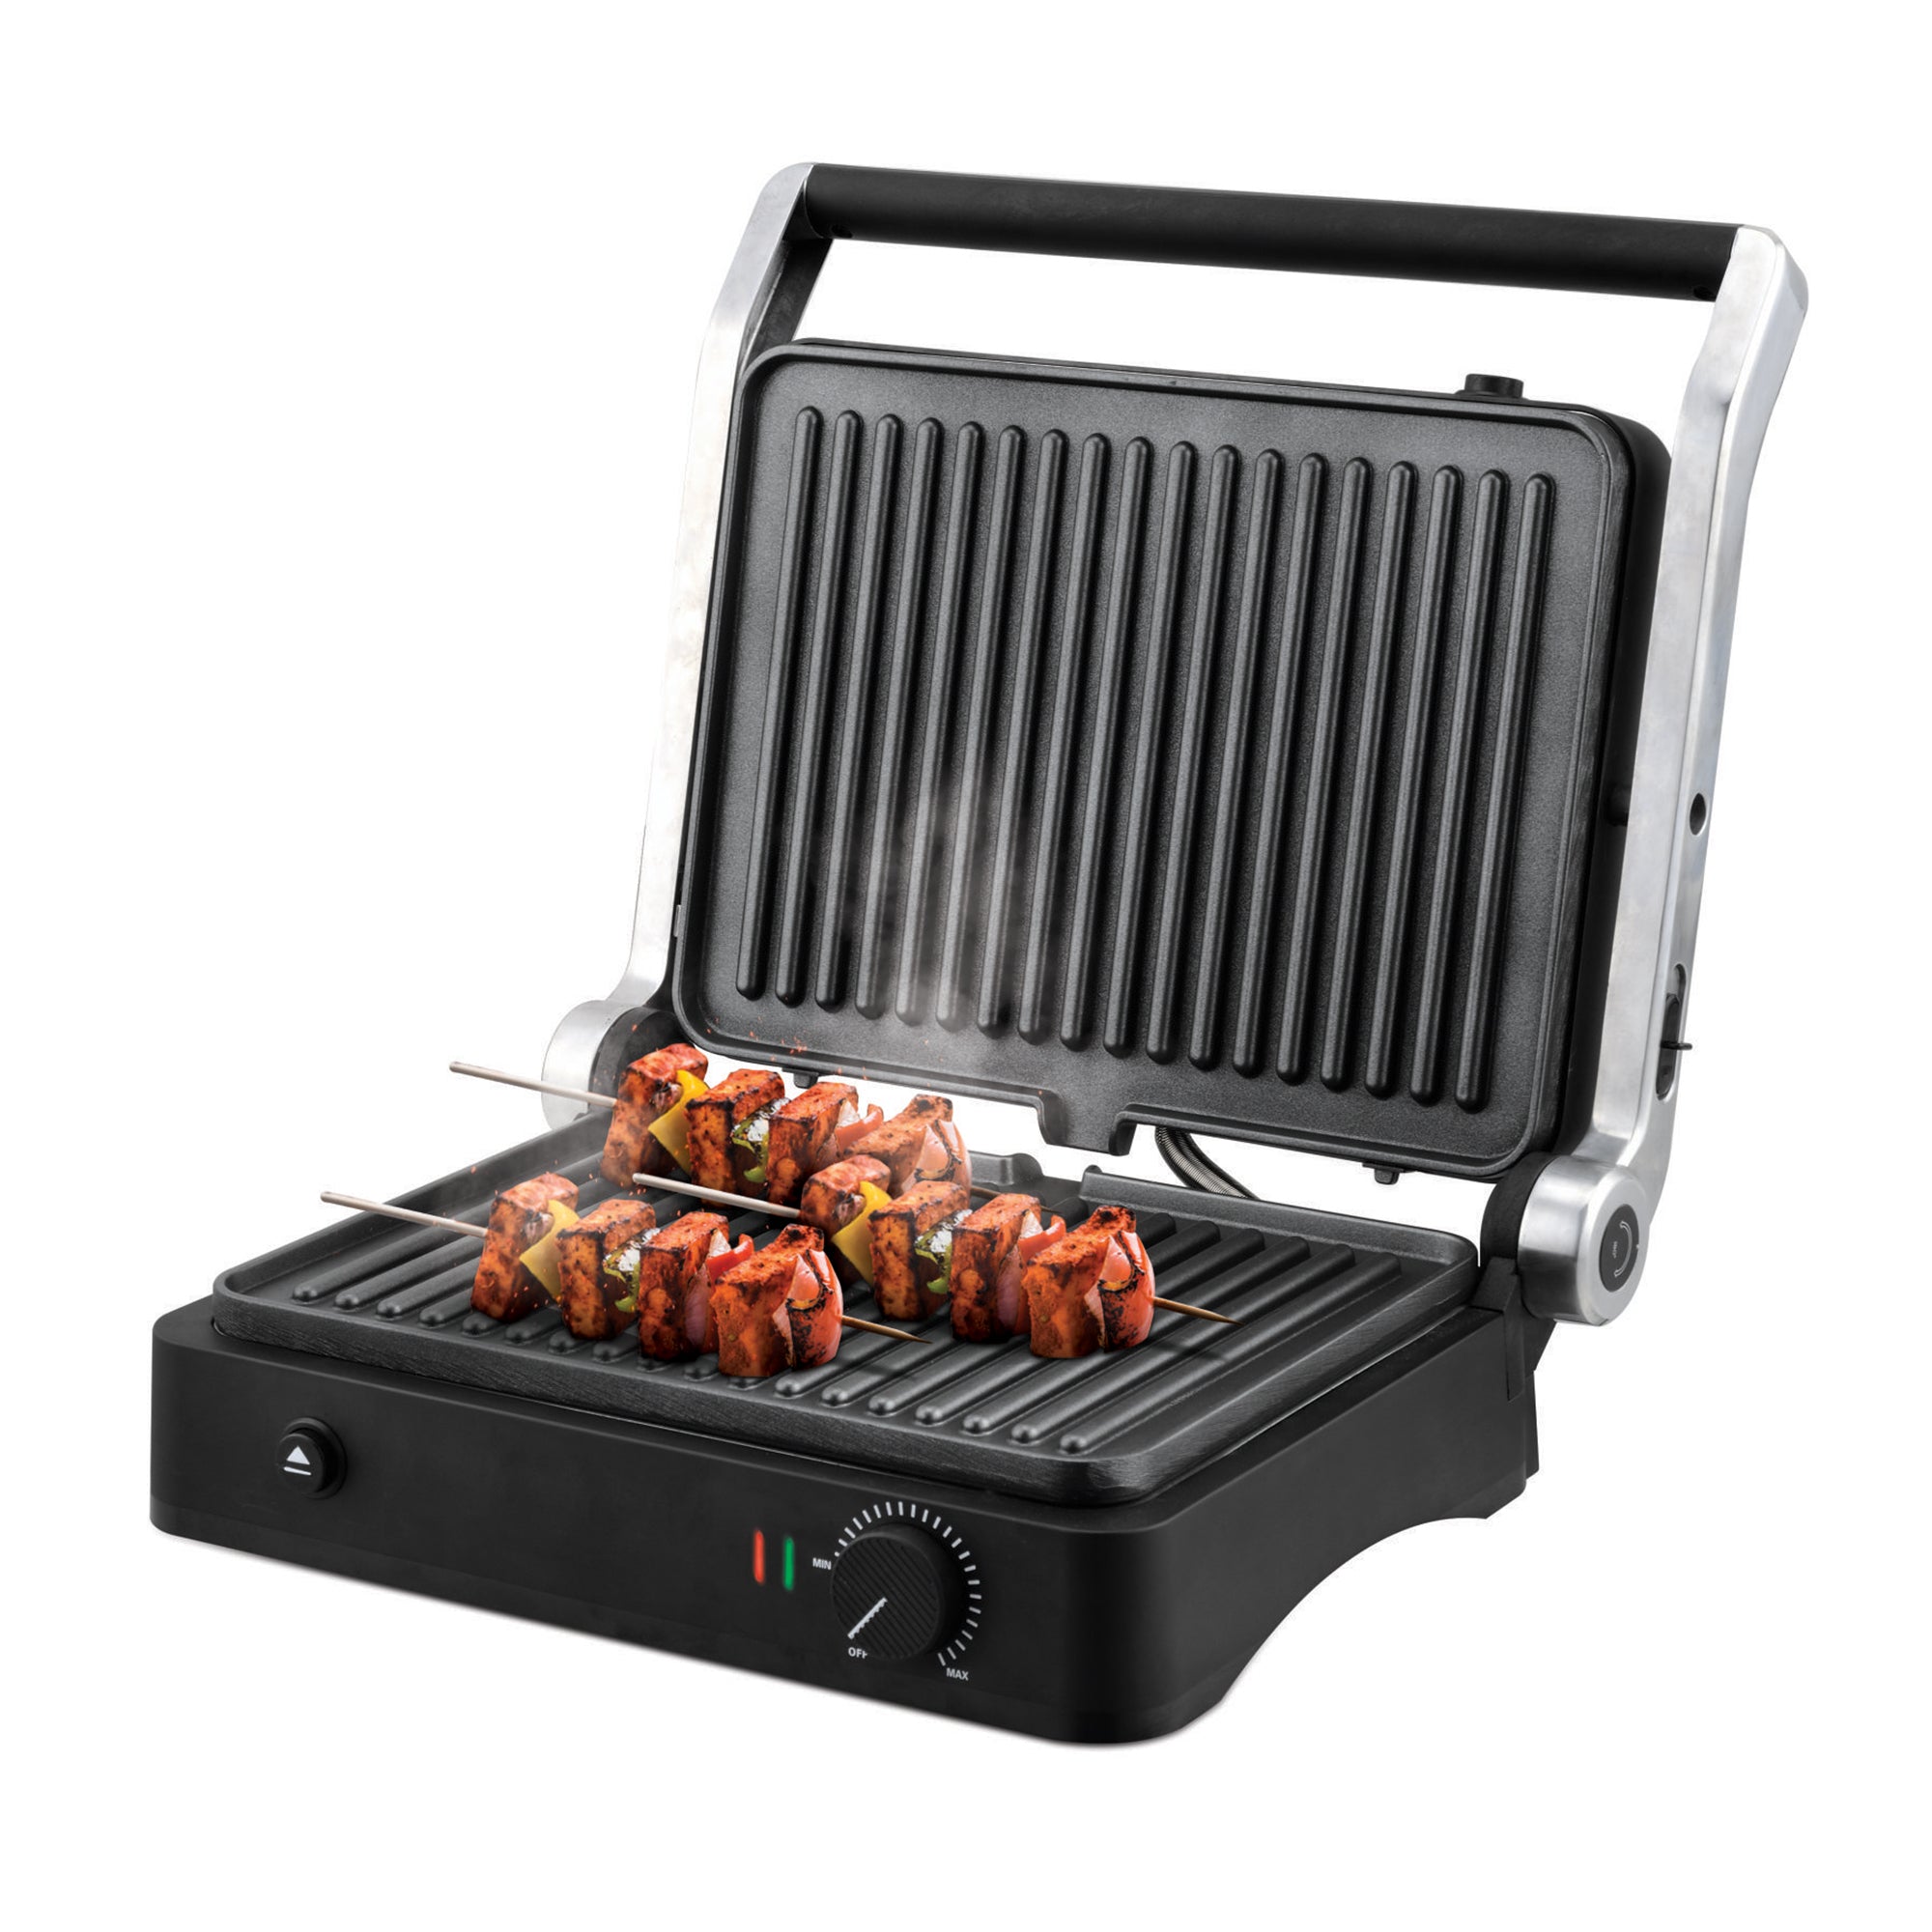 Warmex Home Appliances Grill Master with 180° Rotation